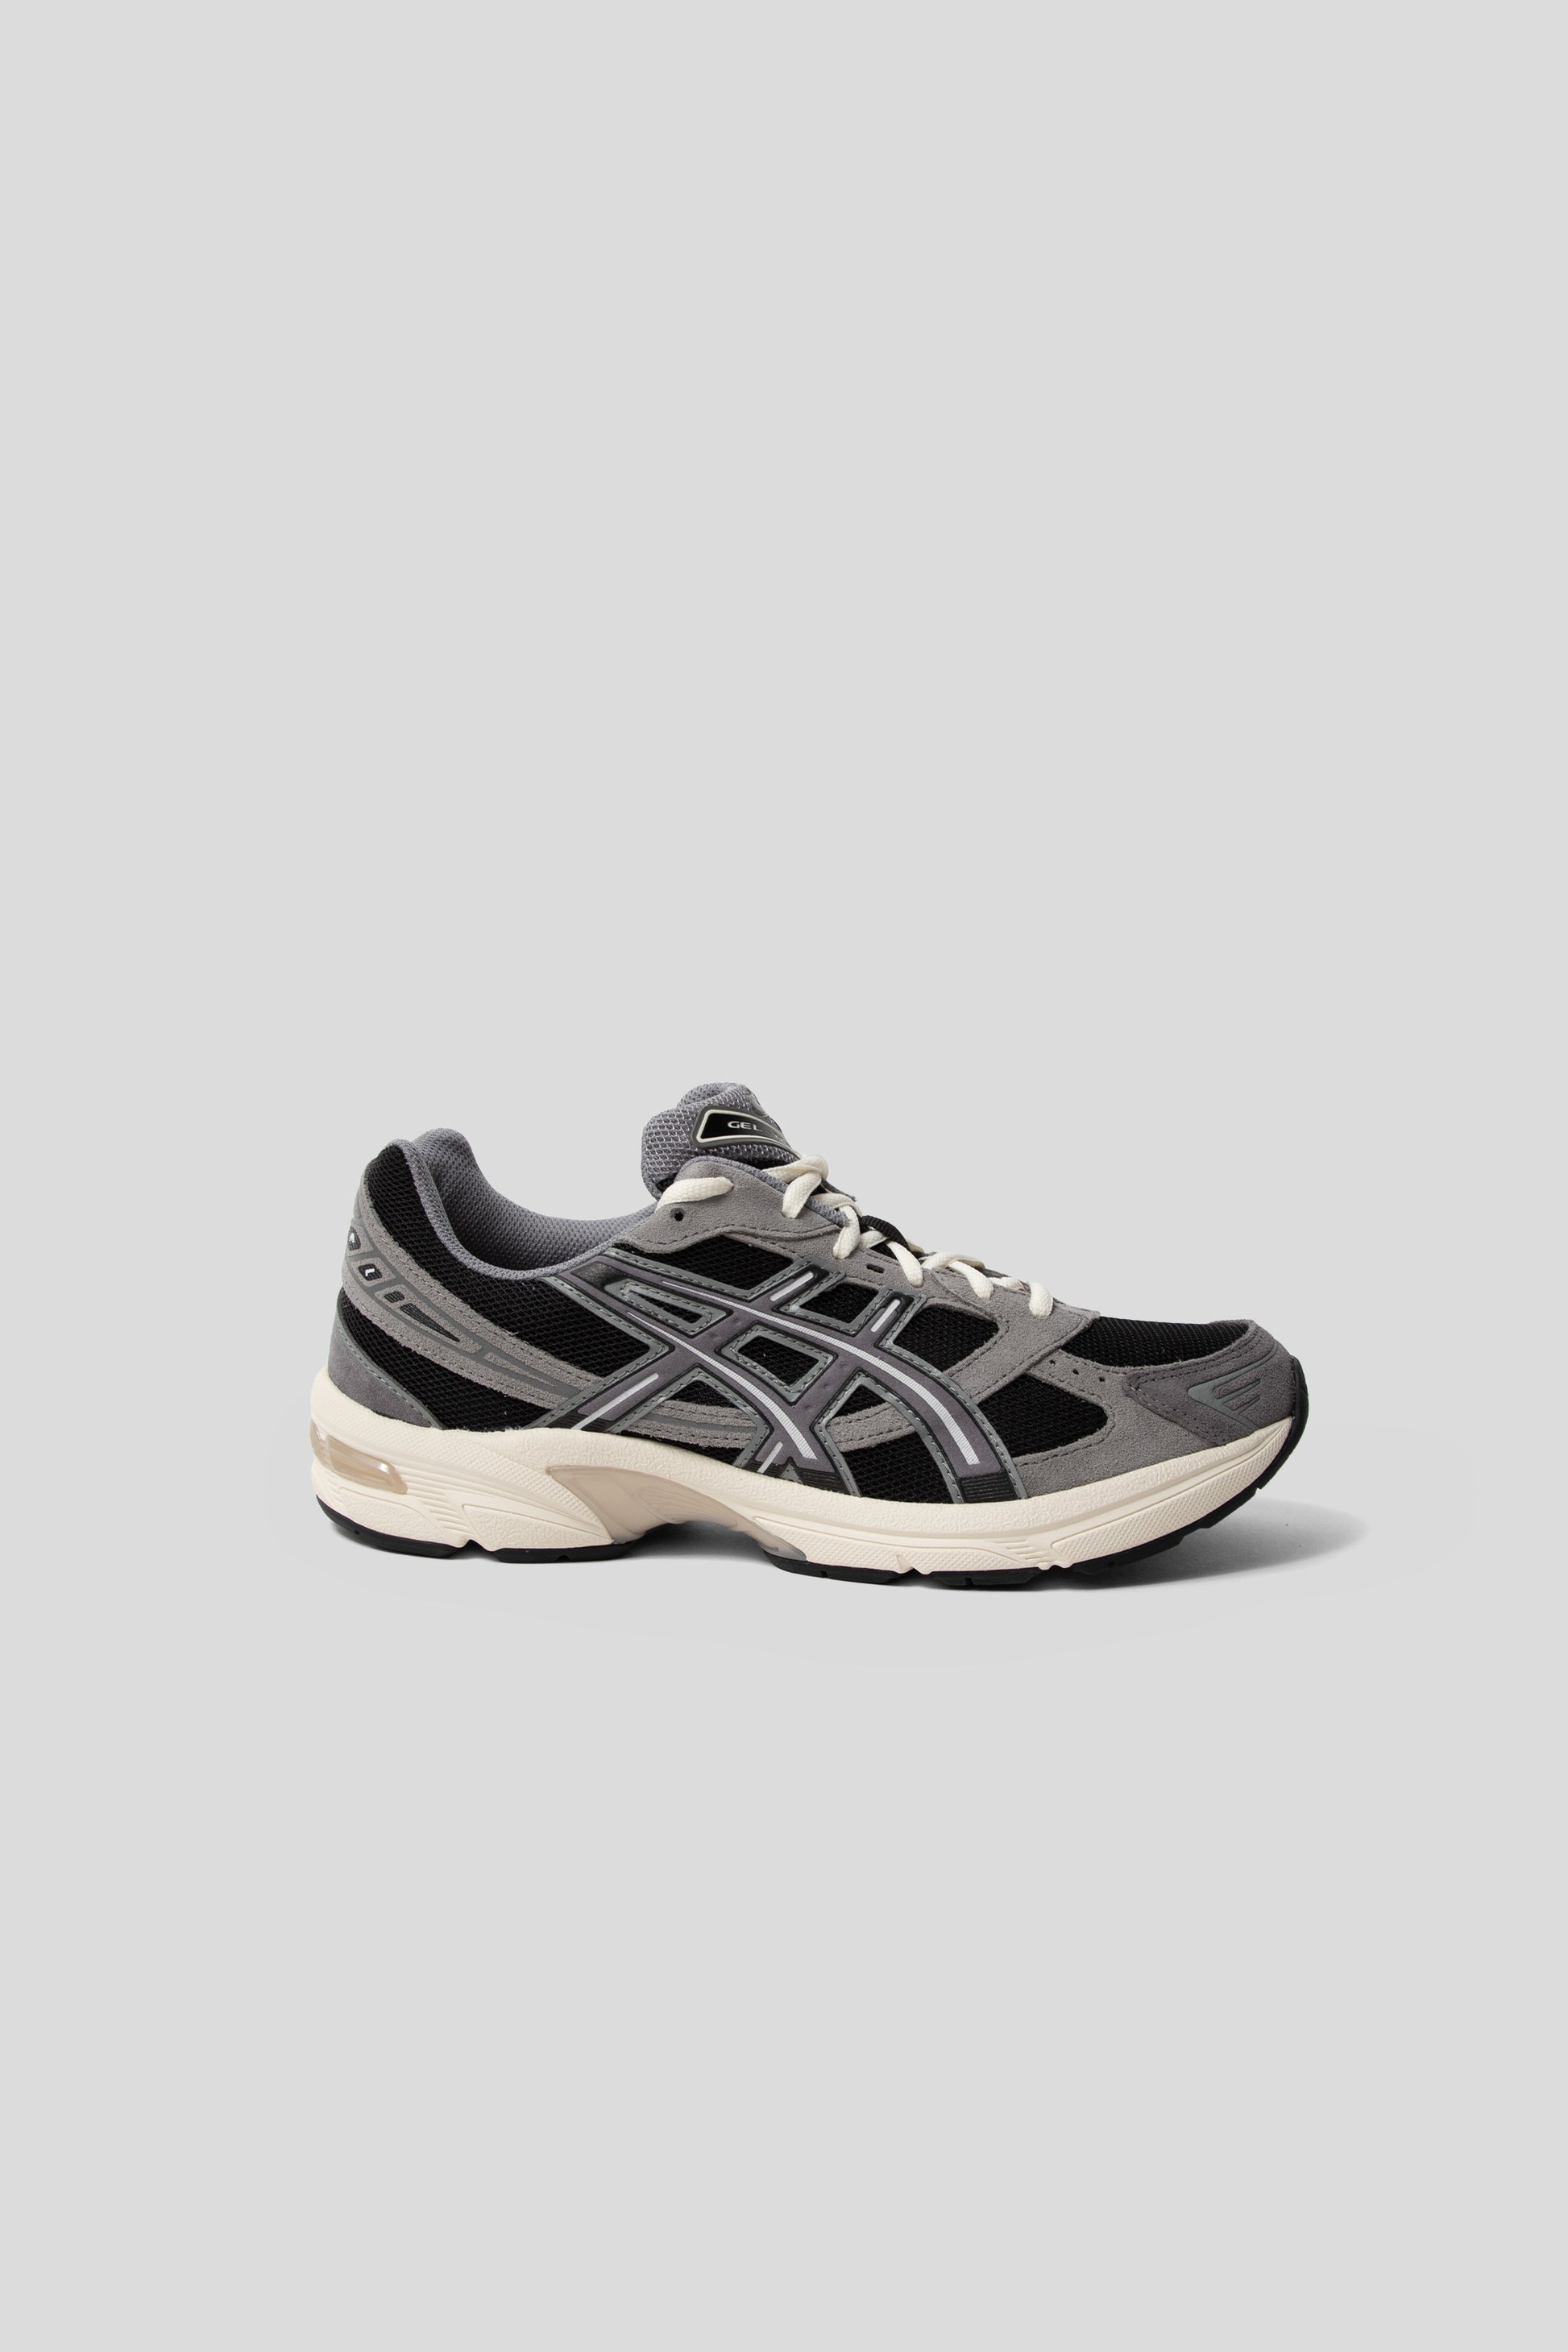 Asics Gel-1130 sneakers in Black and Carbon